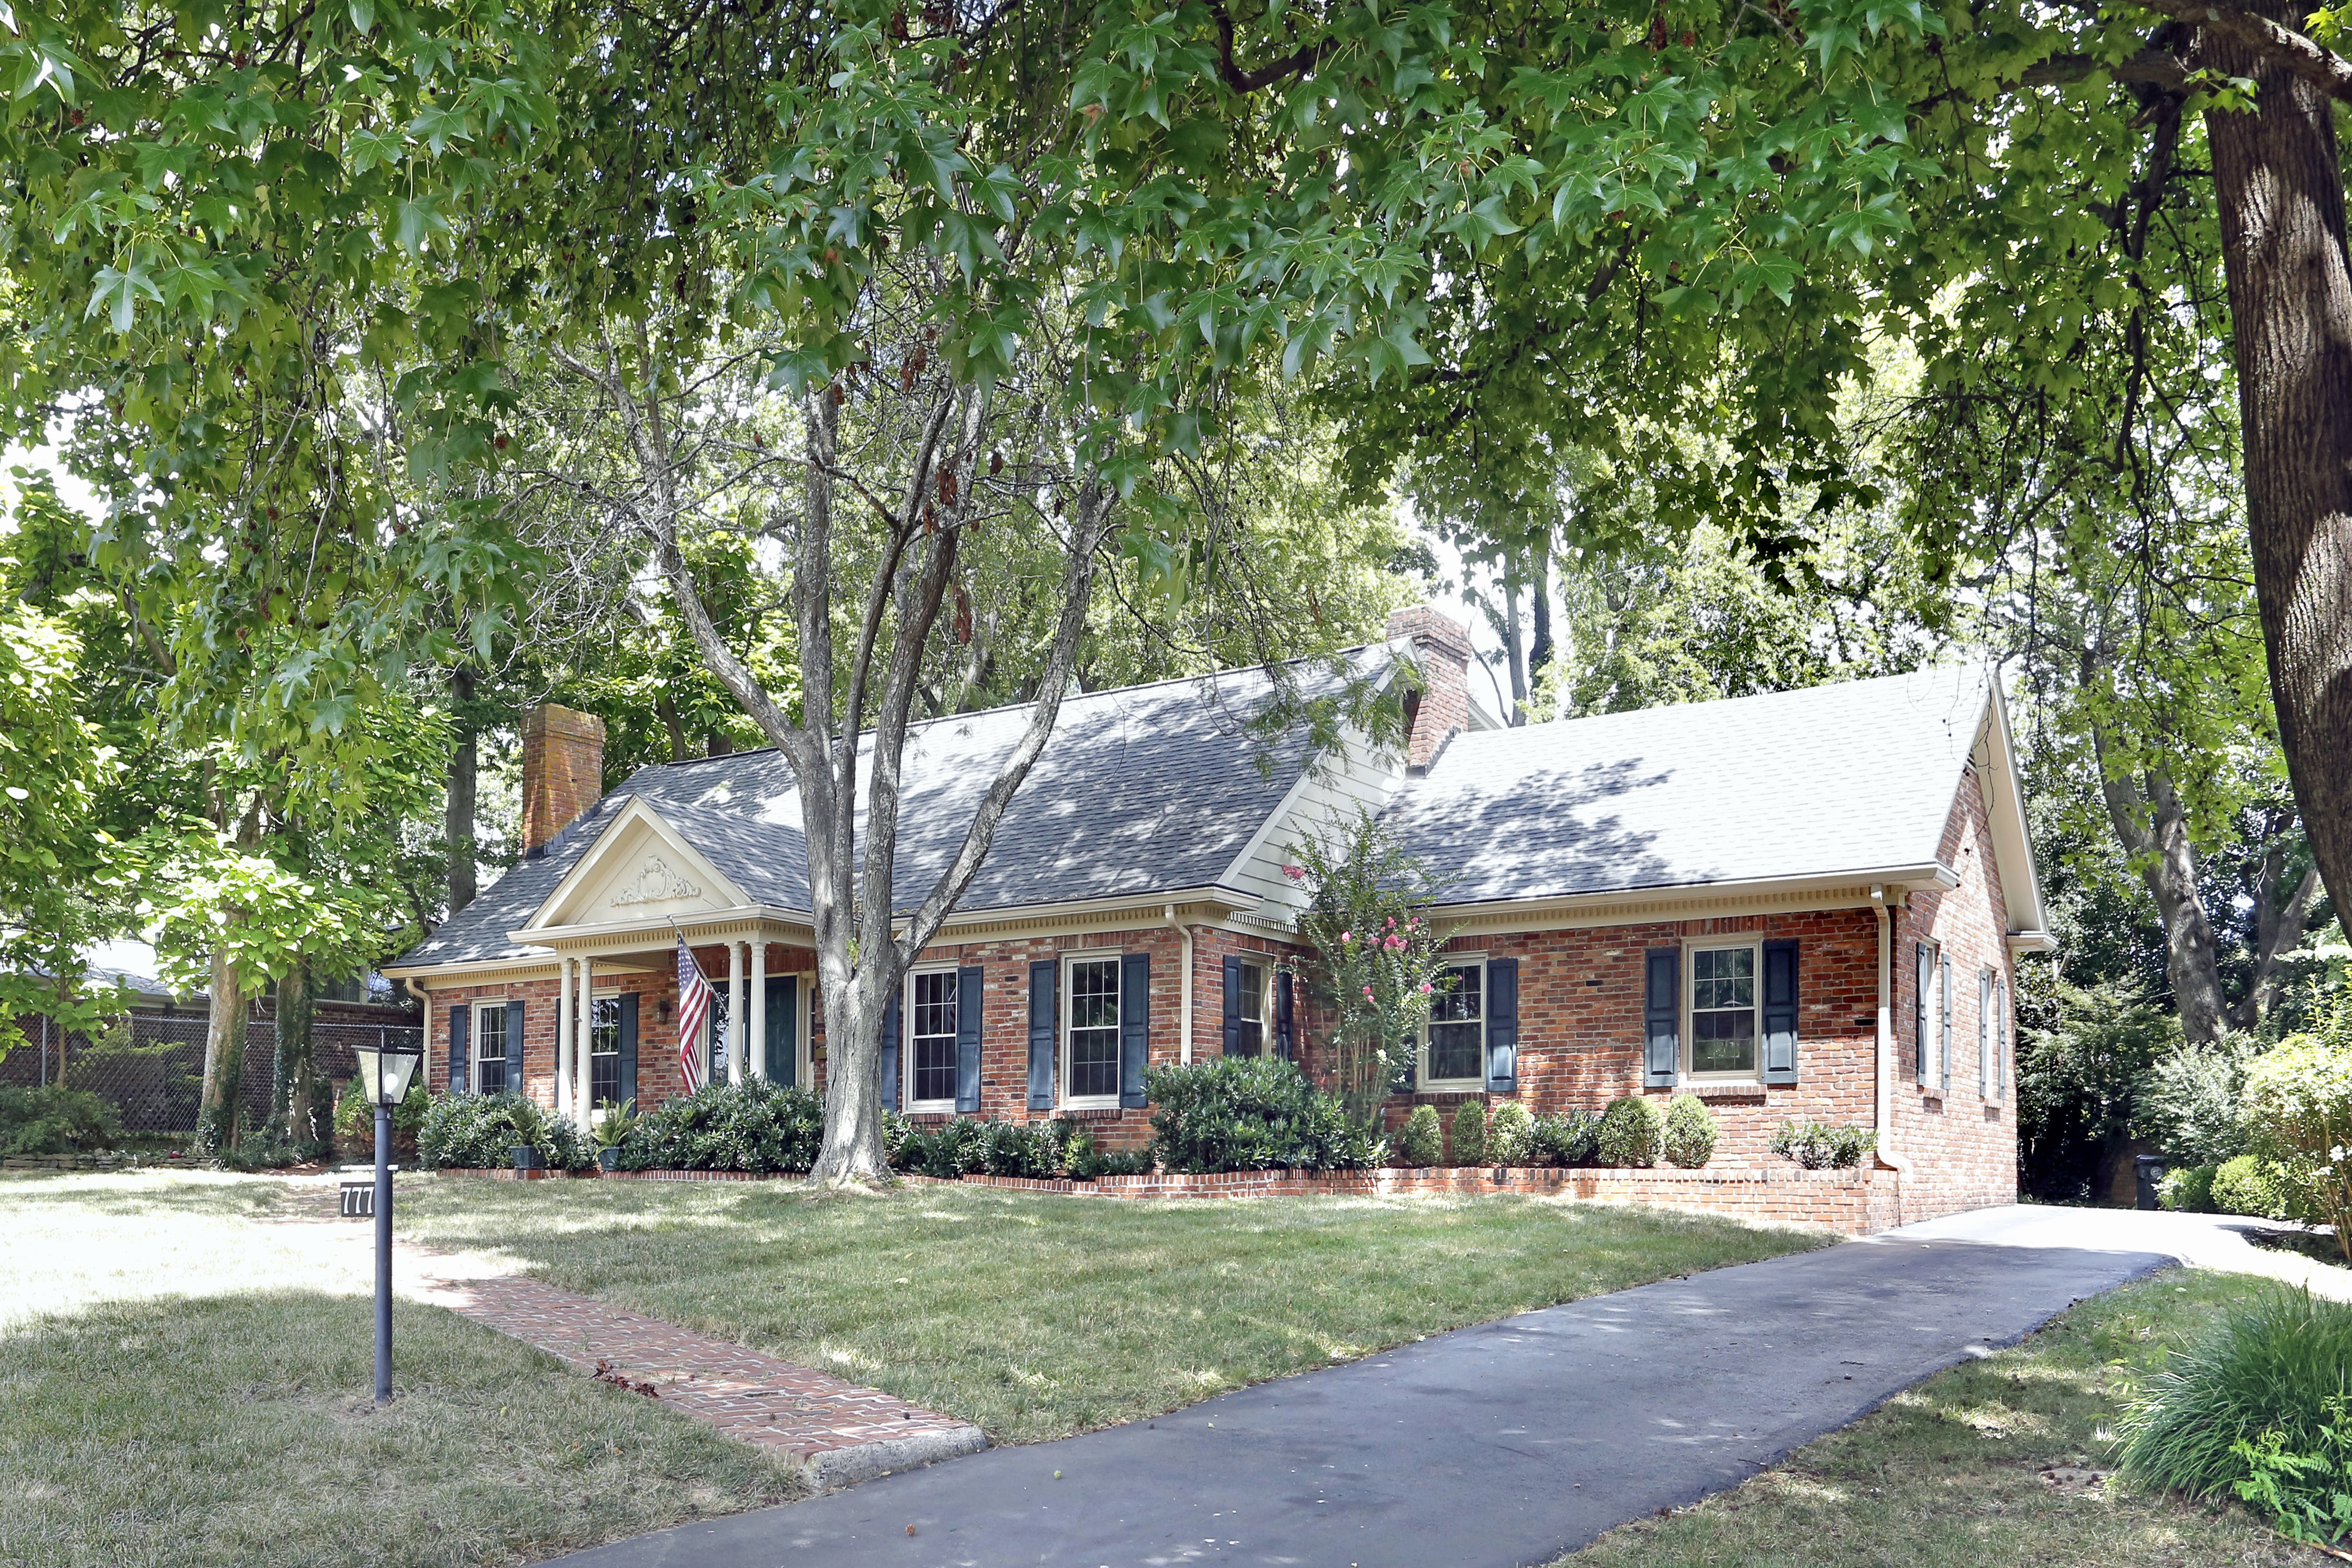 Ranch style home typical of Glendover, Lexington